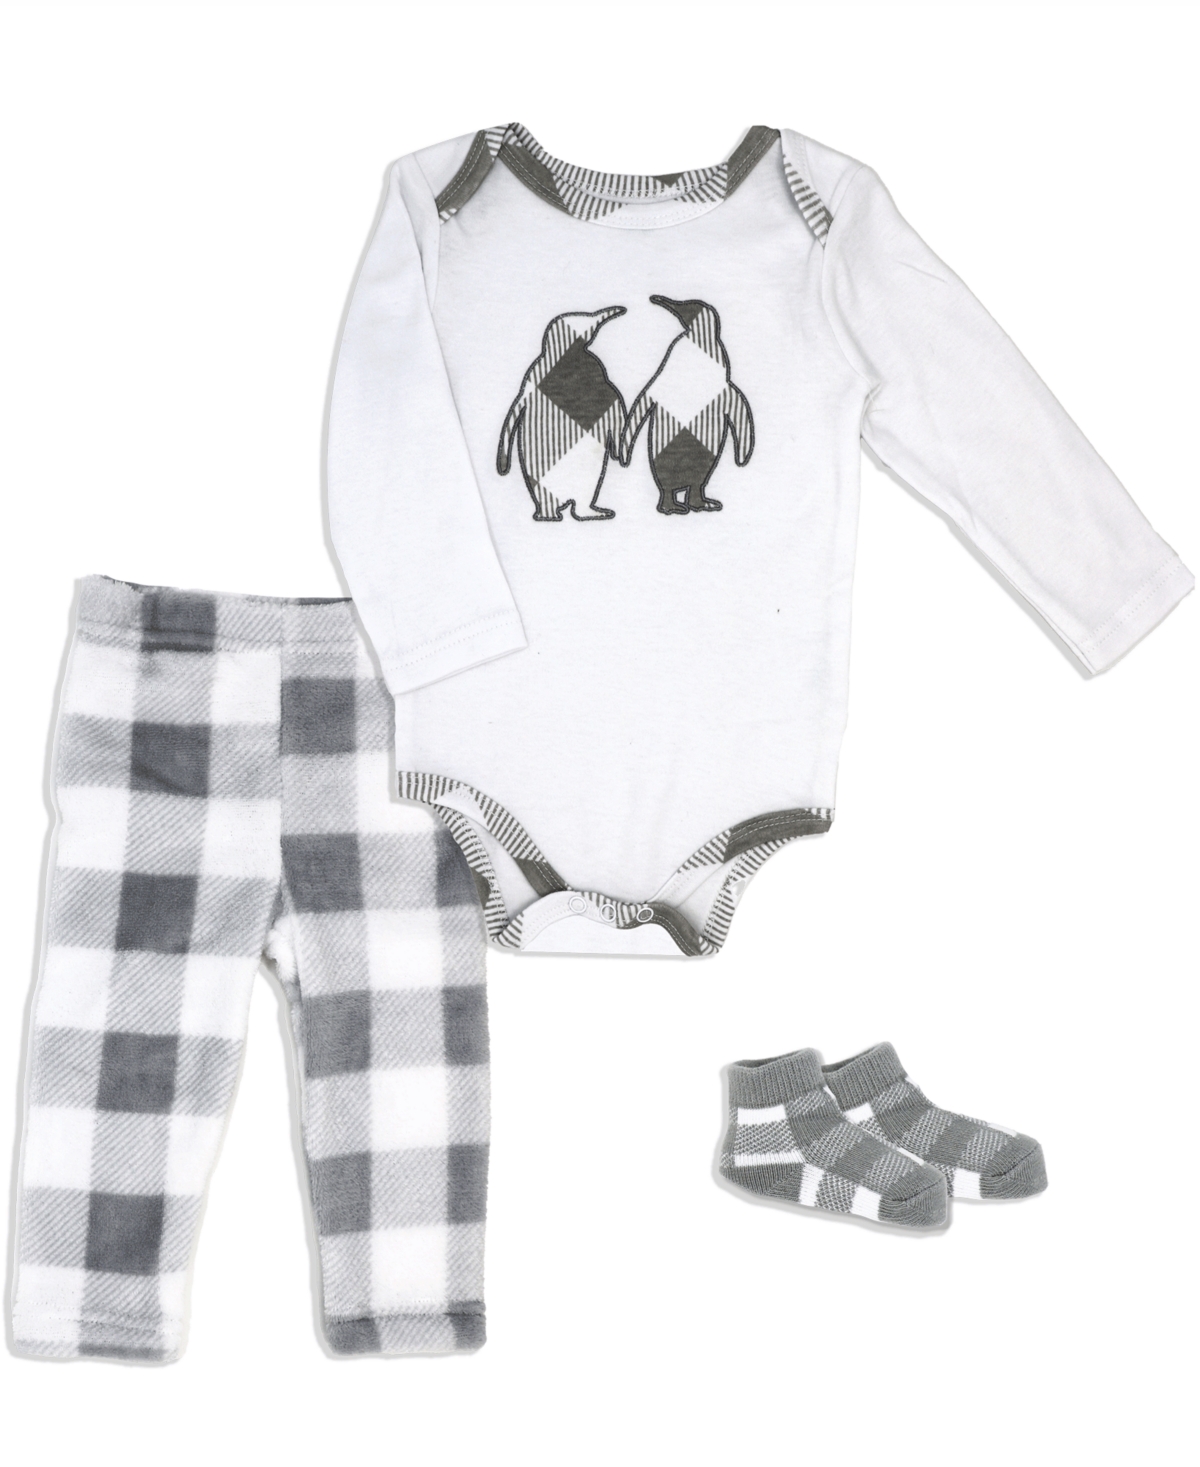 Baby Mode Baby Boys Or Baby Girls Buffalo Plaid Bodysuit, Pants And Socks, 3 Piece Set In Gray And White